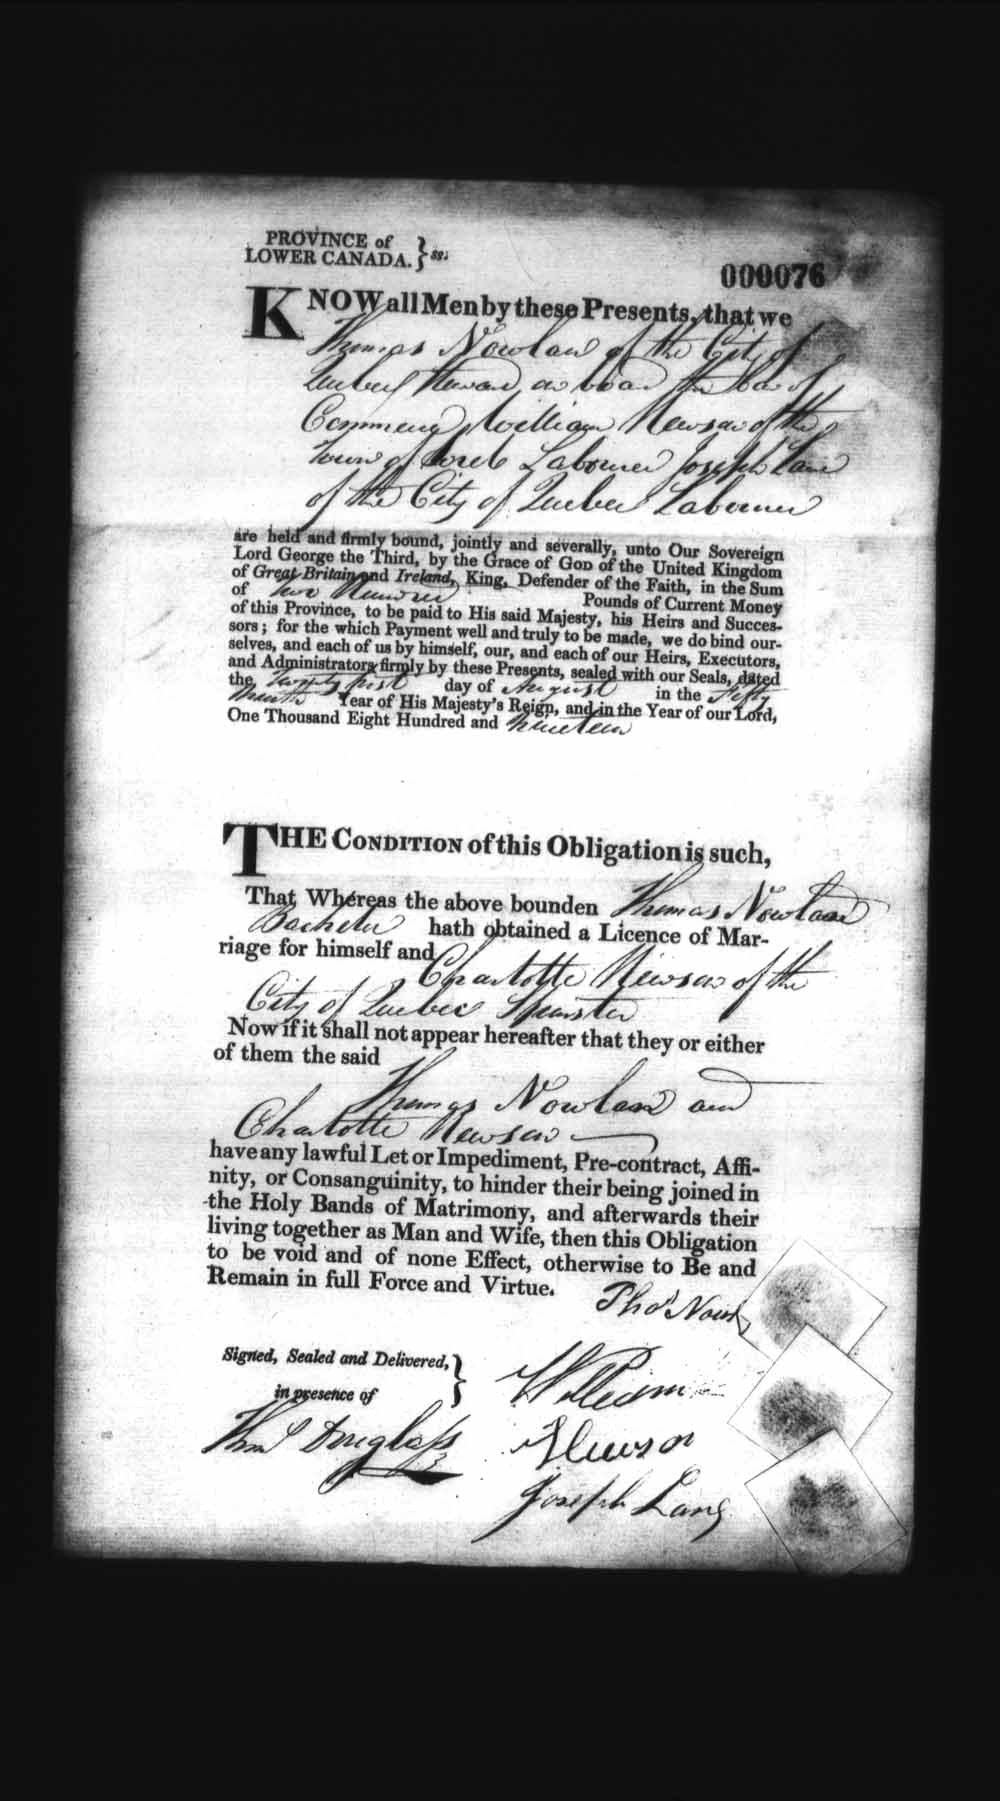 Digitized page of Upper and Lower Canada Marriage Bonds (1779-1865) for Image No.: e008235900